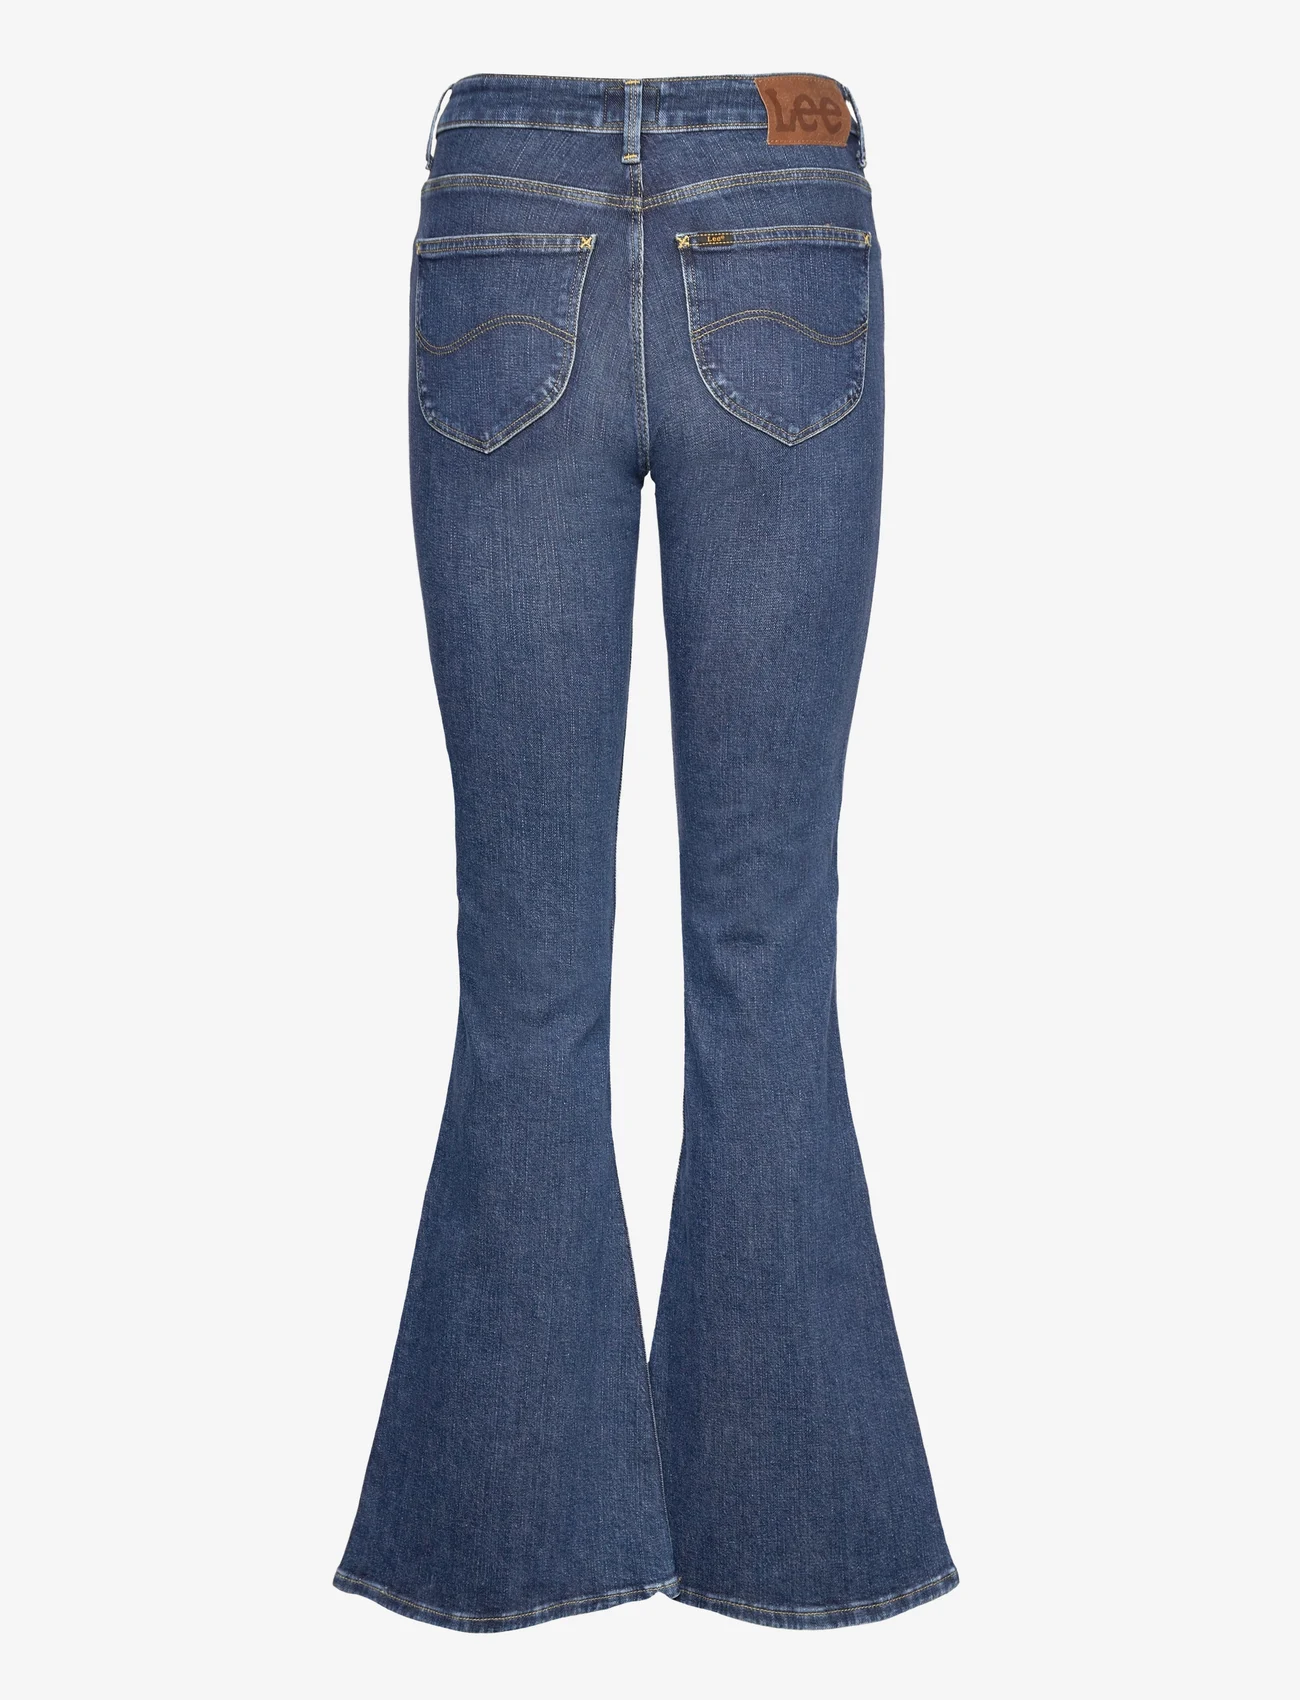 Lee Jeans - BREESE - flared jeans - blue typhoon - 1